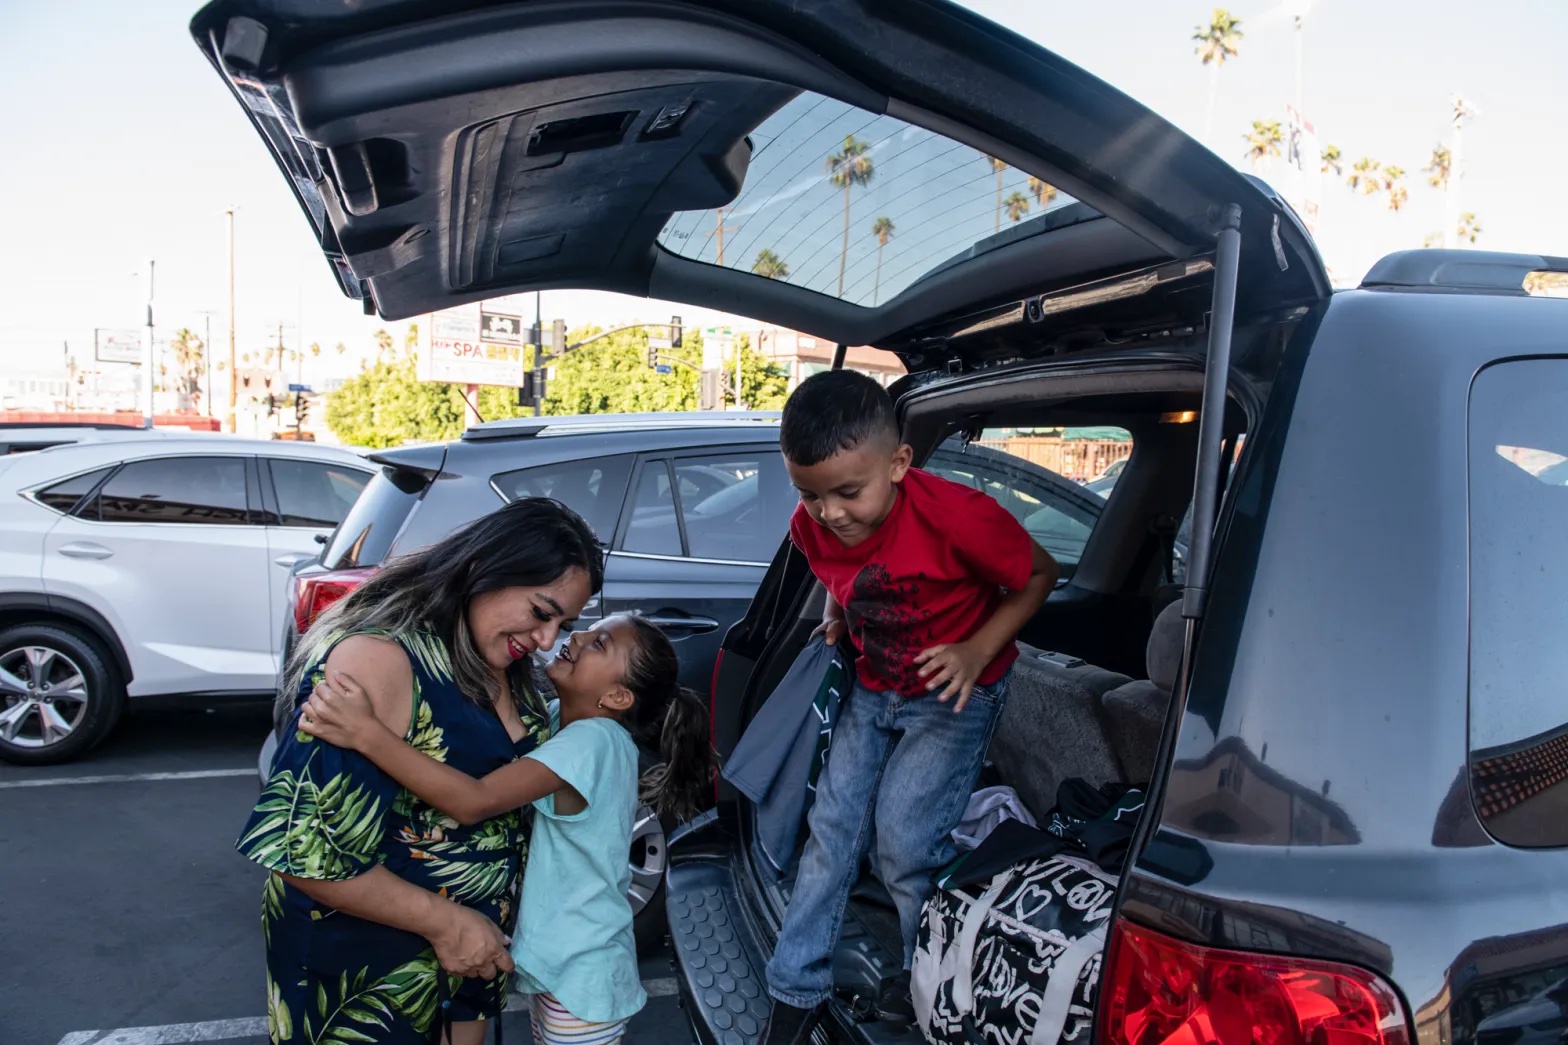 A Latina woman helps her two small kids out of the car, one of the kids is kissing her on the cheek as the other gets out.